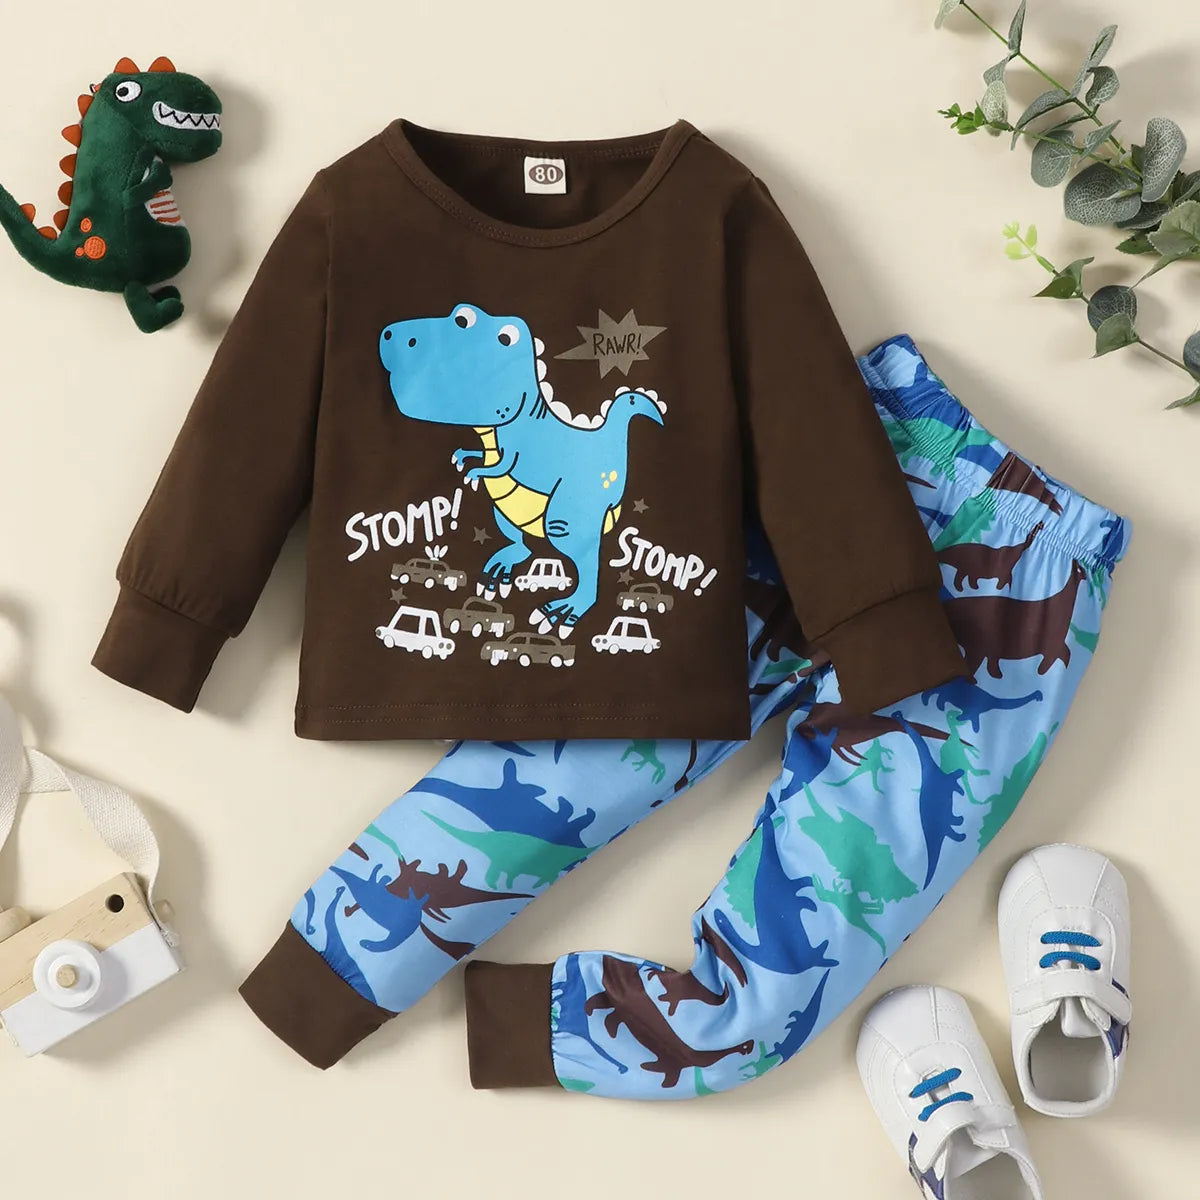 Autumn children's clothing casual cartoon home clothes set autumn clothing children's dinosaur underwear two-piece set